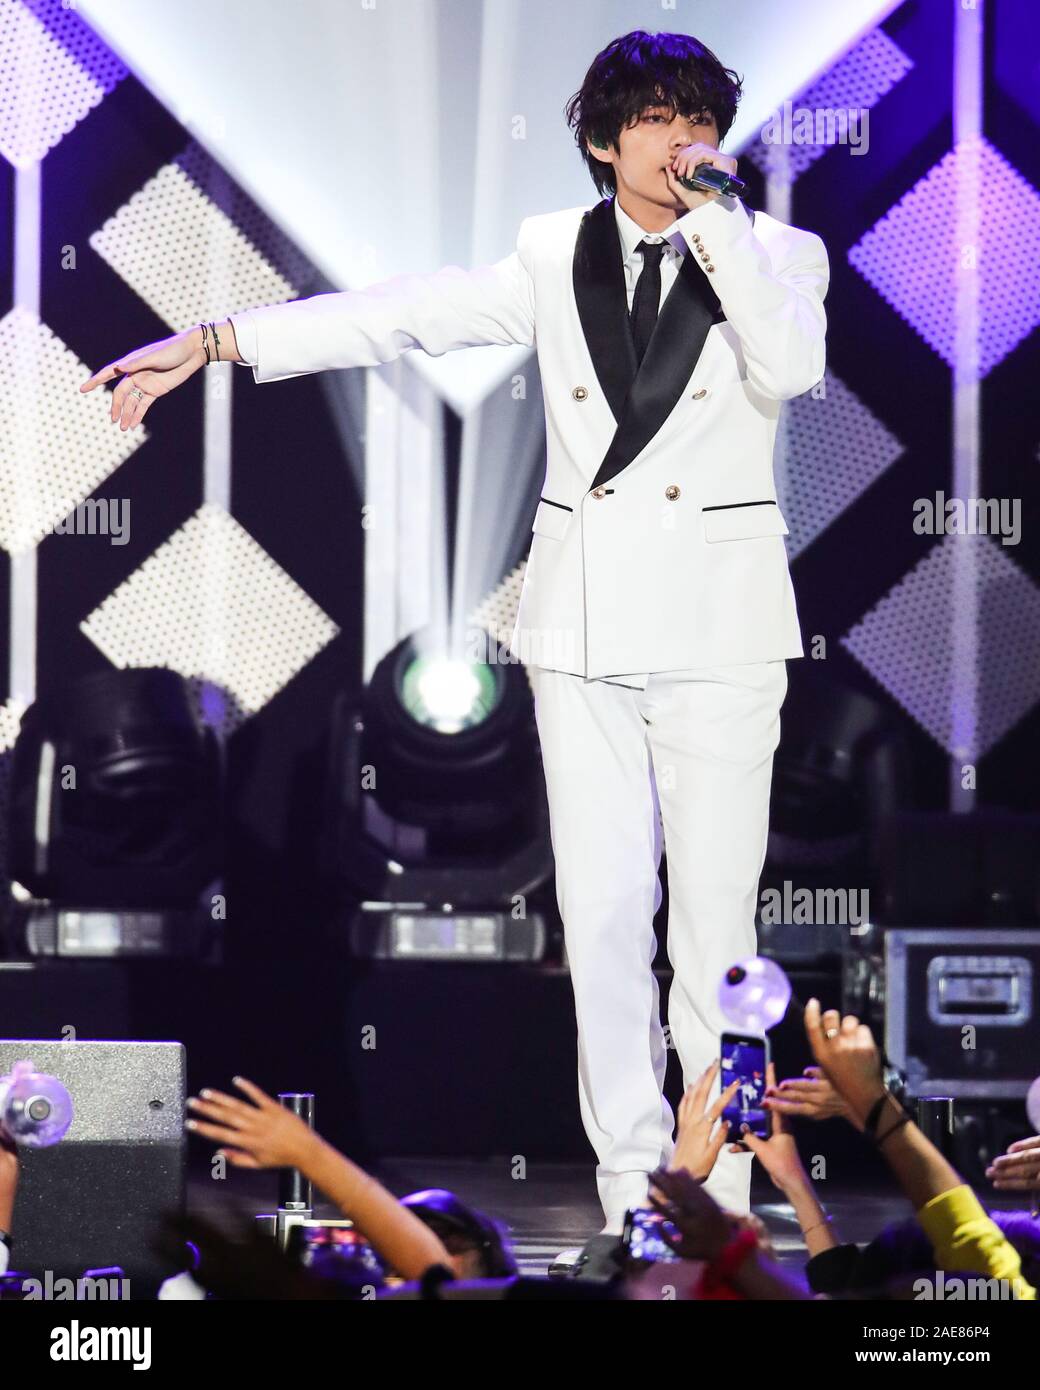 INGLEWOOD, LOS ANGELES, CALIFORNIA, USA - DECEMBER 06: Jin (Kim Seok-jin) of BTS performs at 102.7 KIIS FM's Jingle Ball 2019 held at The Forum on December 6, 2019 in Inglewood, Los Angeles, California, United States. (Photo by Xavier Collin/Image Press Agency) Stock Photo